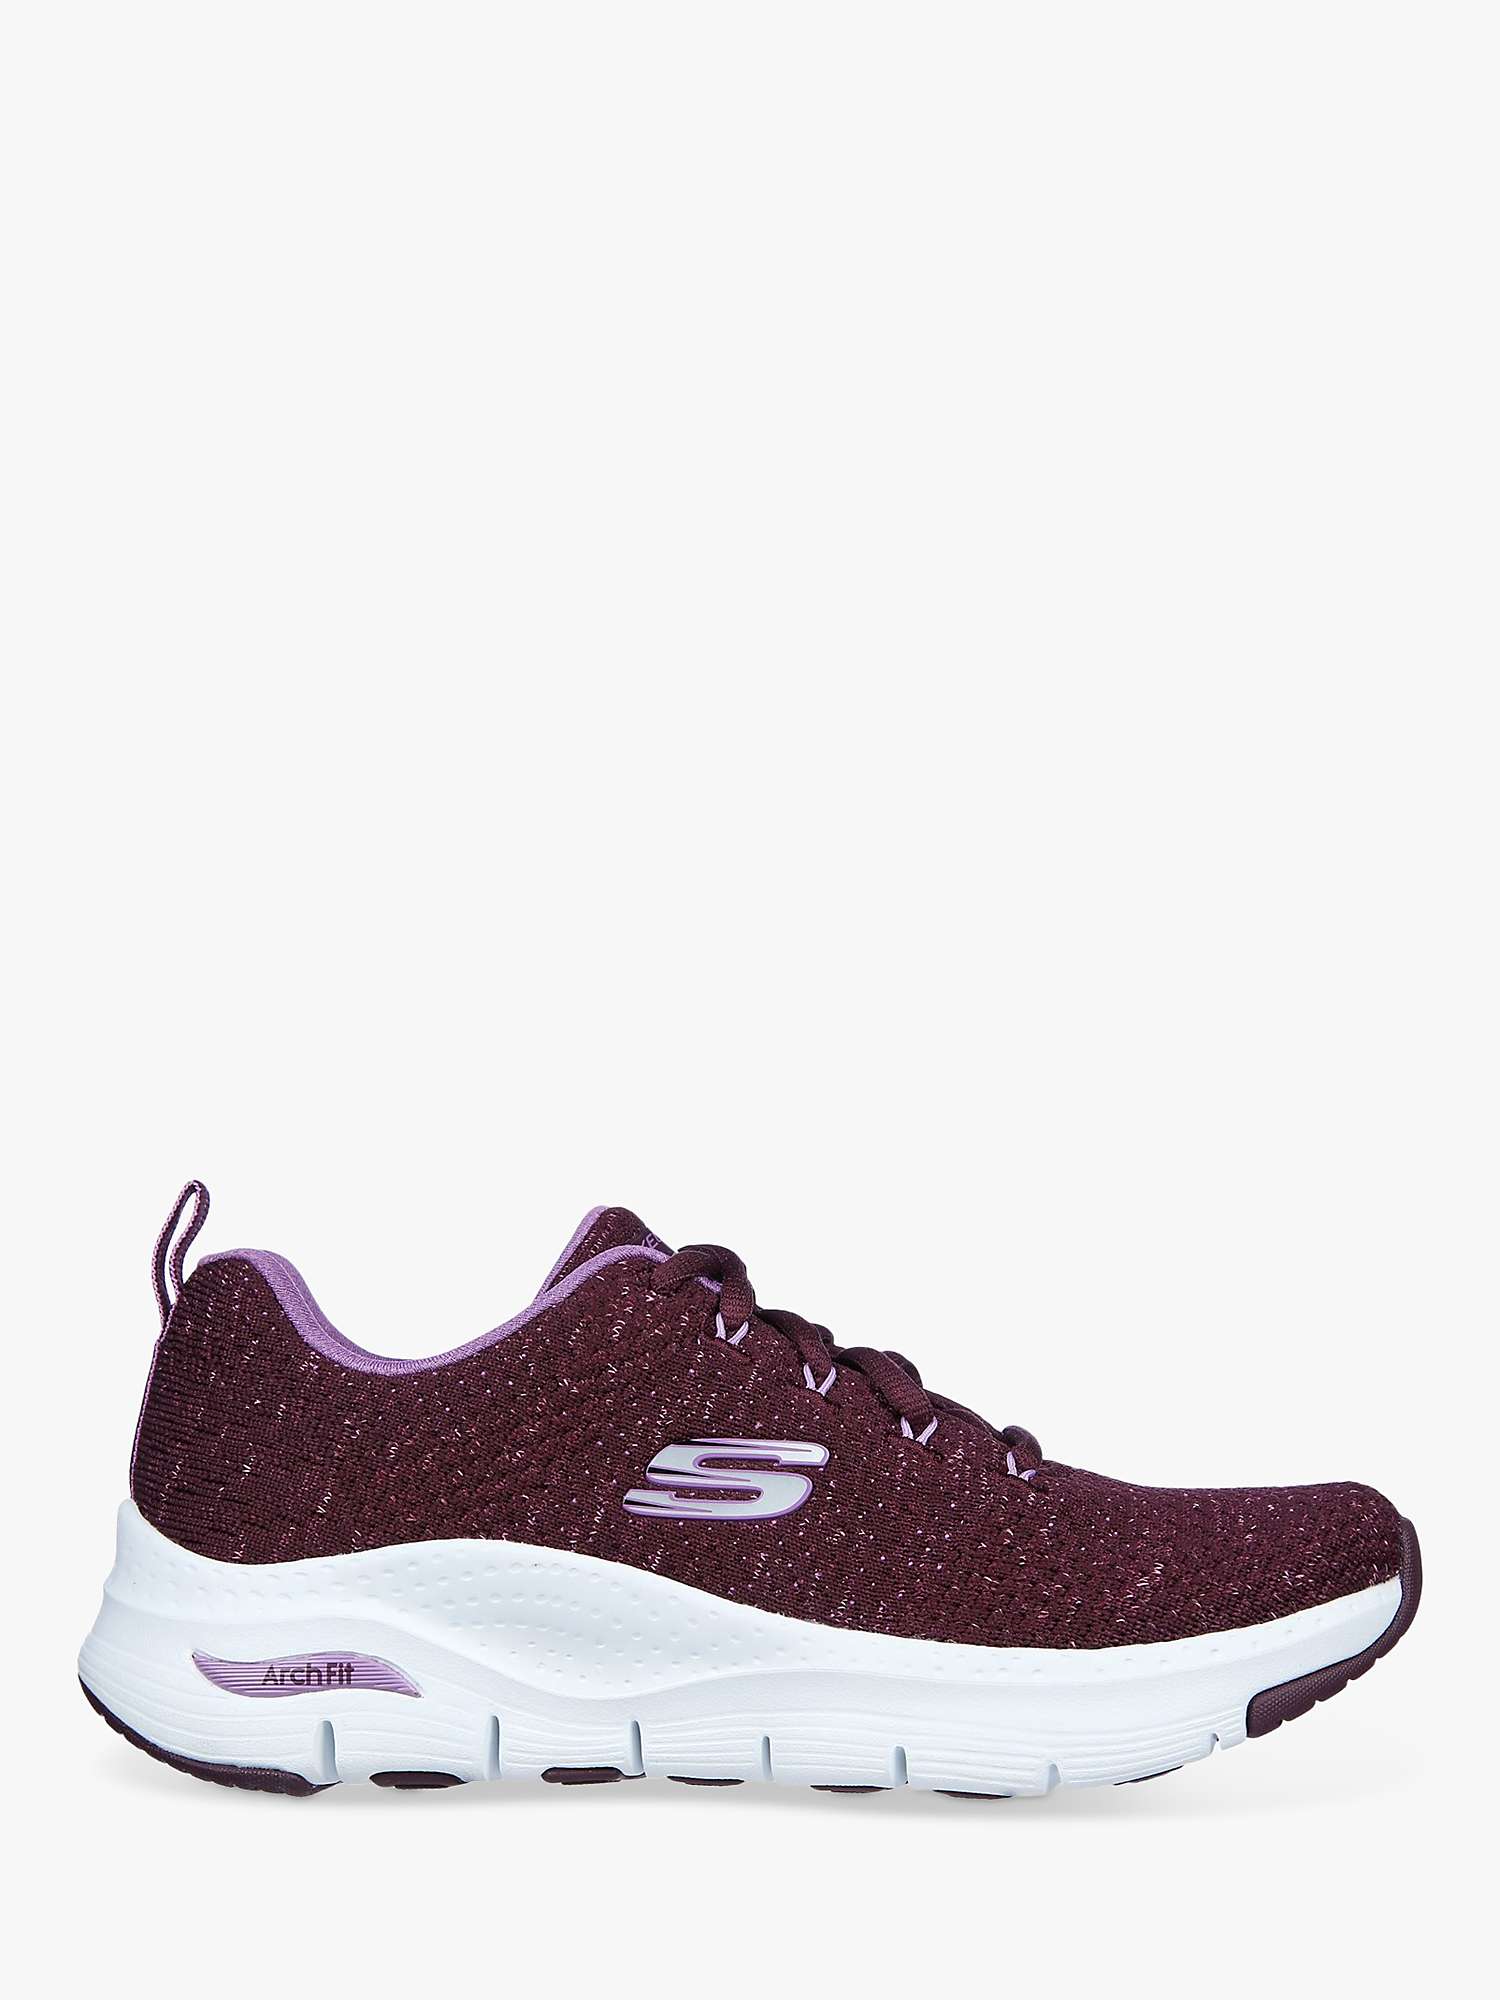 Cincuenta Fuera de borda Júnior Skechers Arch Fit Glee for All Lace Up Trainers, Plum at John Lewis &  Partners